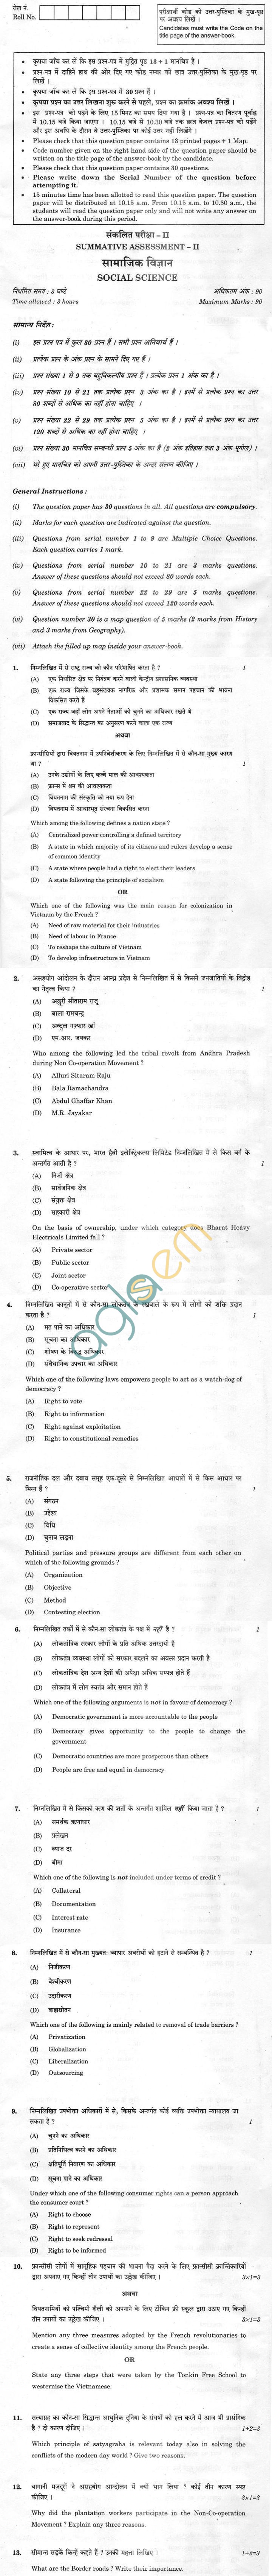 CBSE Compartment Exam 2013 Class X Question Paper - Social Science